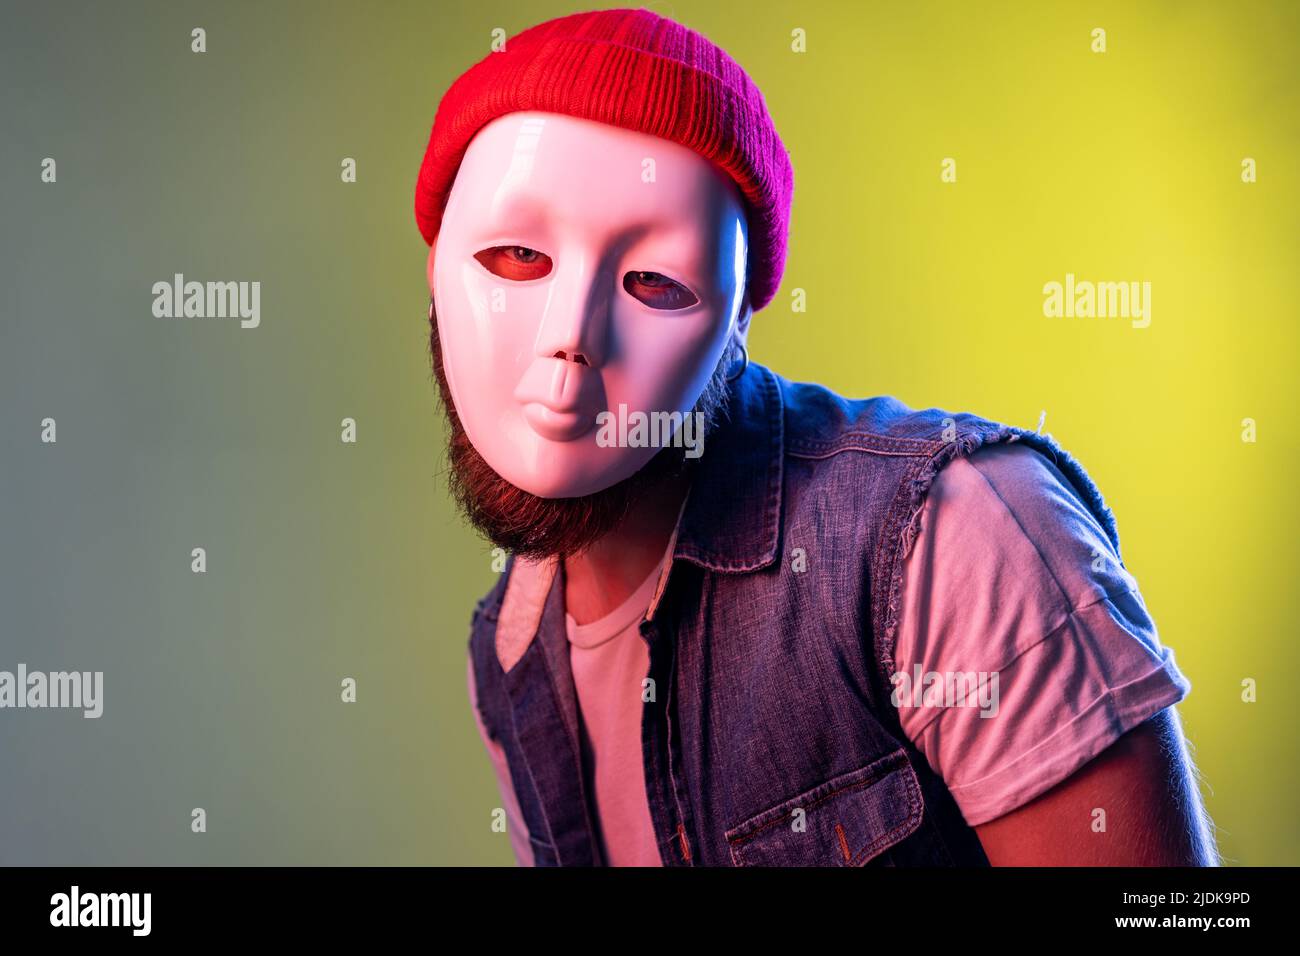 Portrait hipster man in white mask, spying undercover, corruption, hiding his personality, wearing beanie hat and denim vest. Indoor studio shot isolated on colorful neon light background. Stock Photo